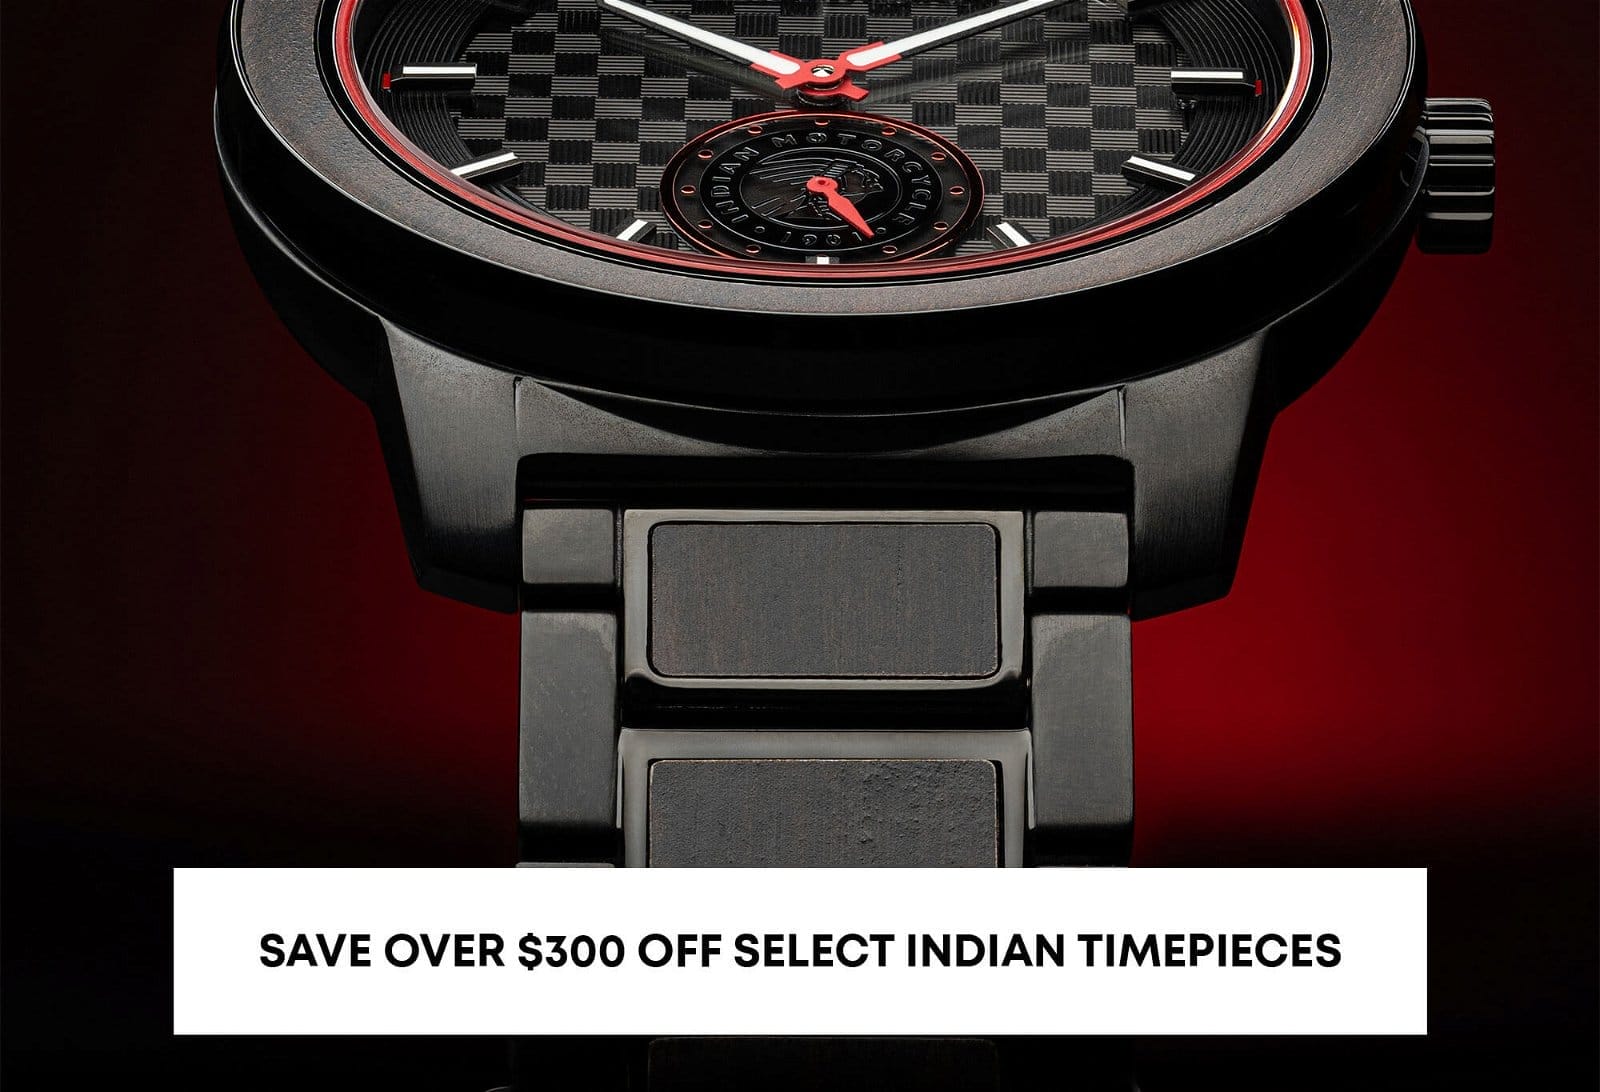 Shop Original Grain and Save up to \\$300 on these timepieces